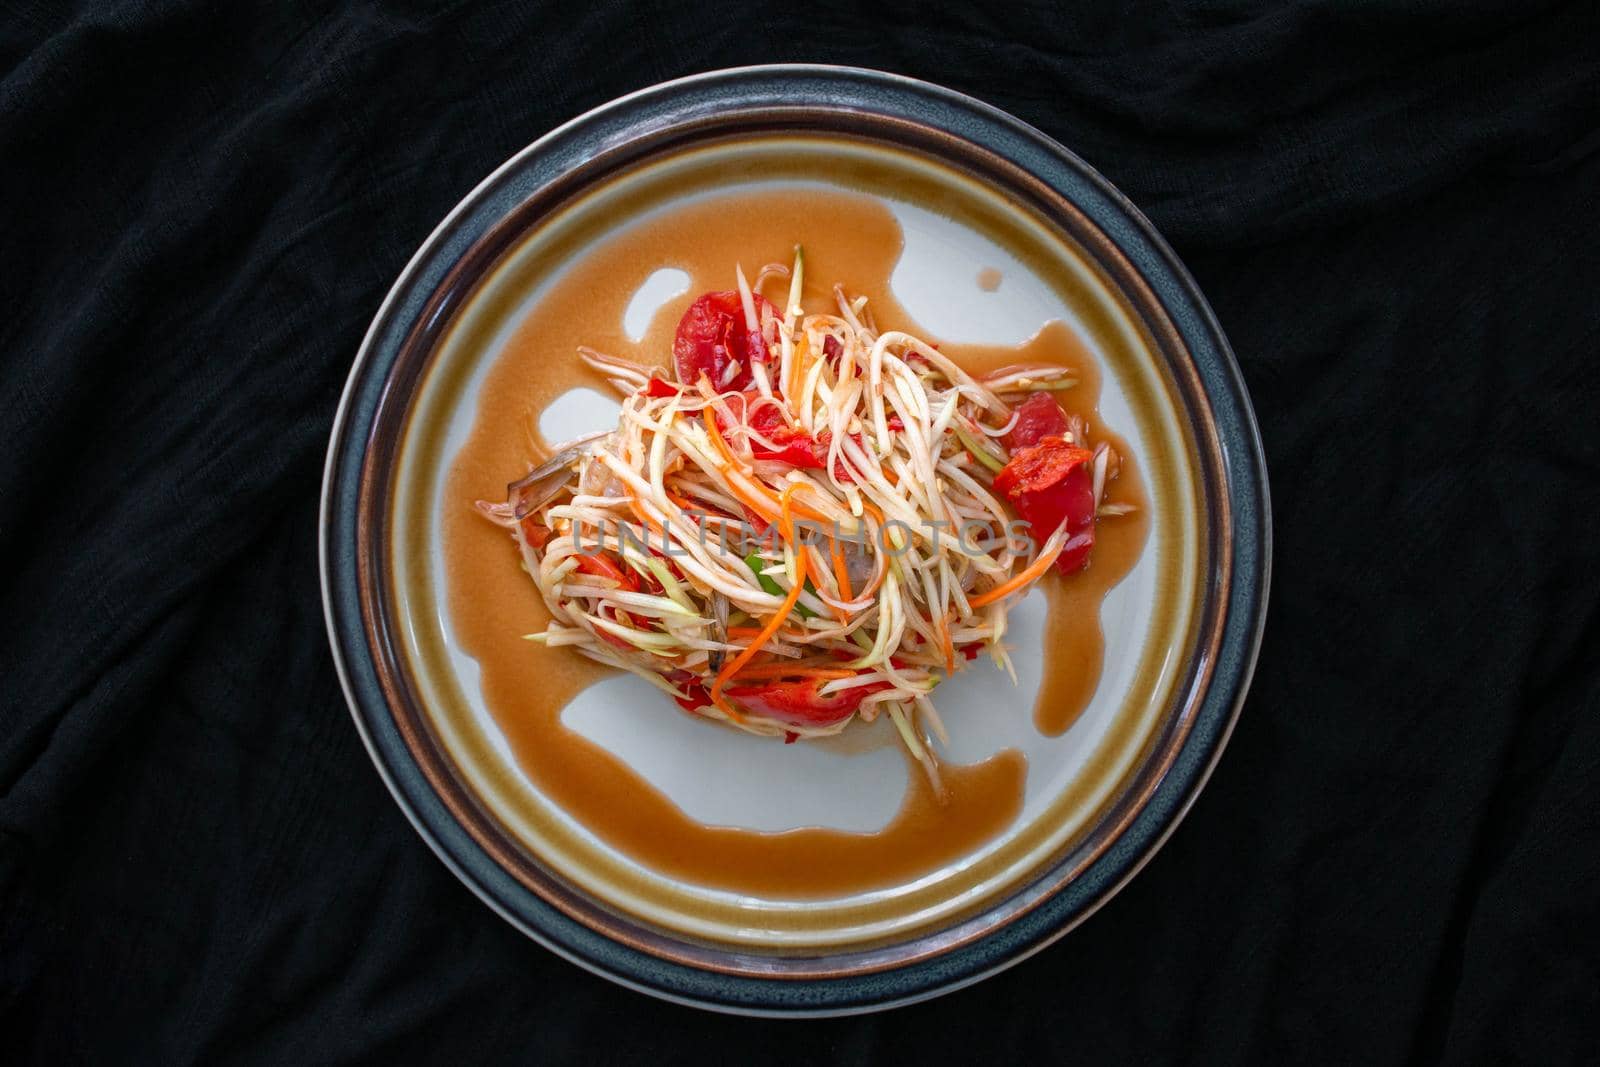 Papaya Salad menu, the main ingredient is papaya Is healthy food You can find it in street food stalls, a local dish in Thailand It is a popular food.